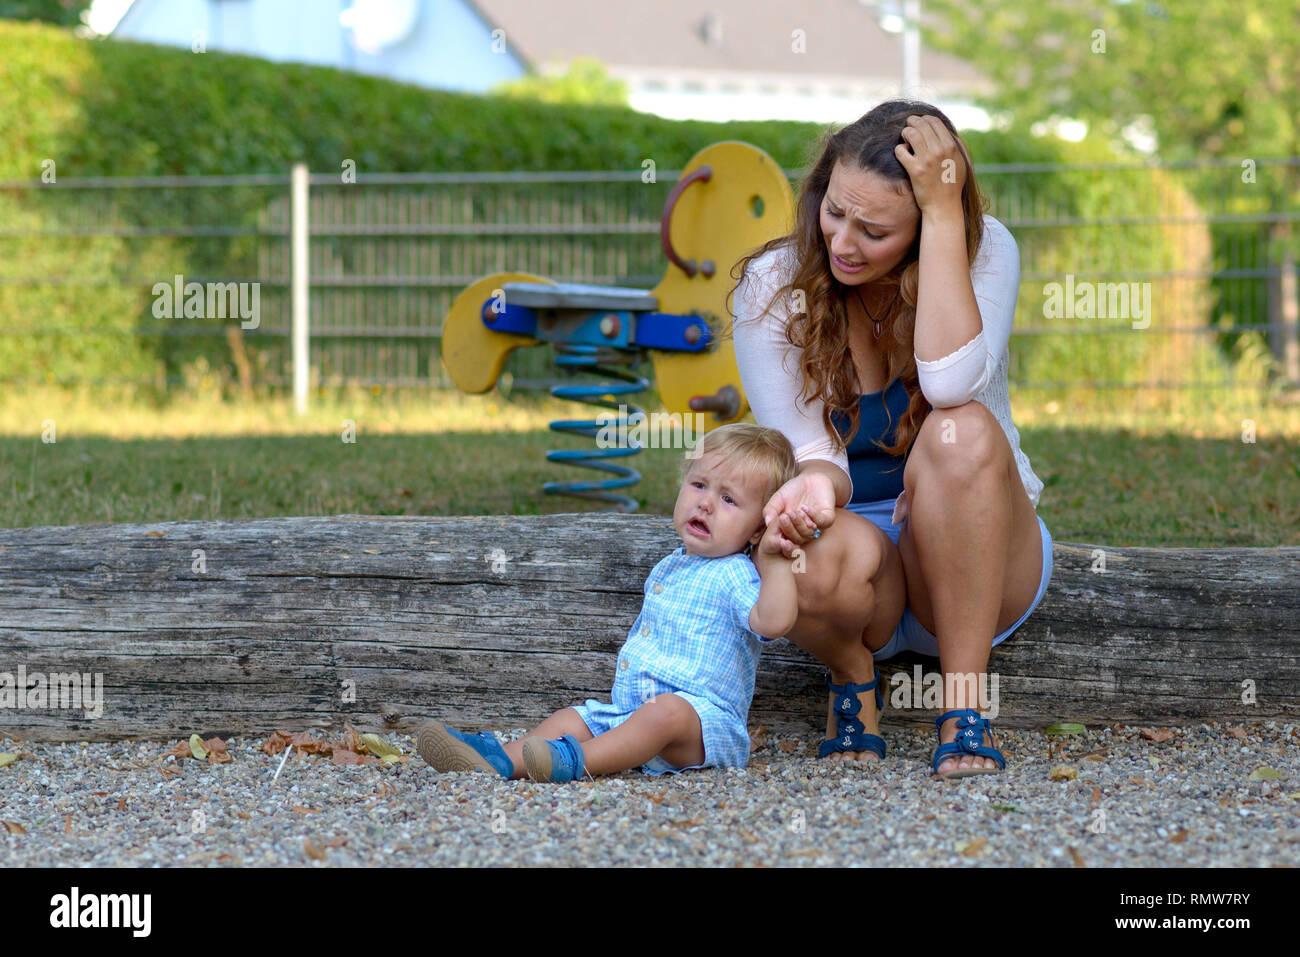 Troubled stressed young mother with her crying unhappy baby son outdoors in a playground Stock Photo